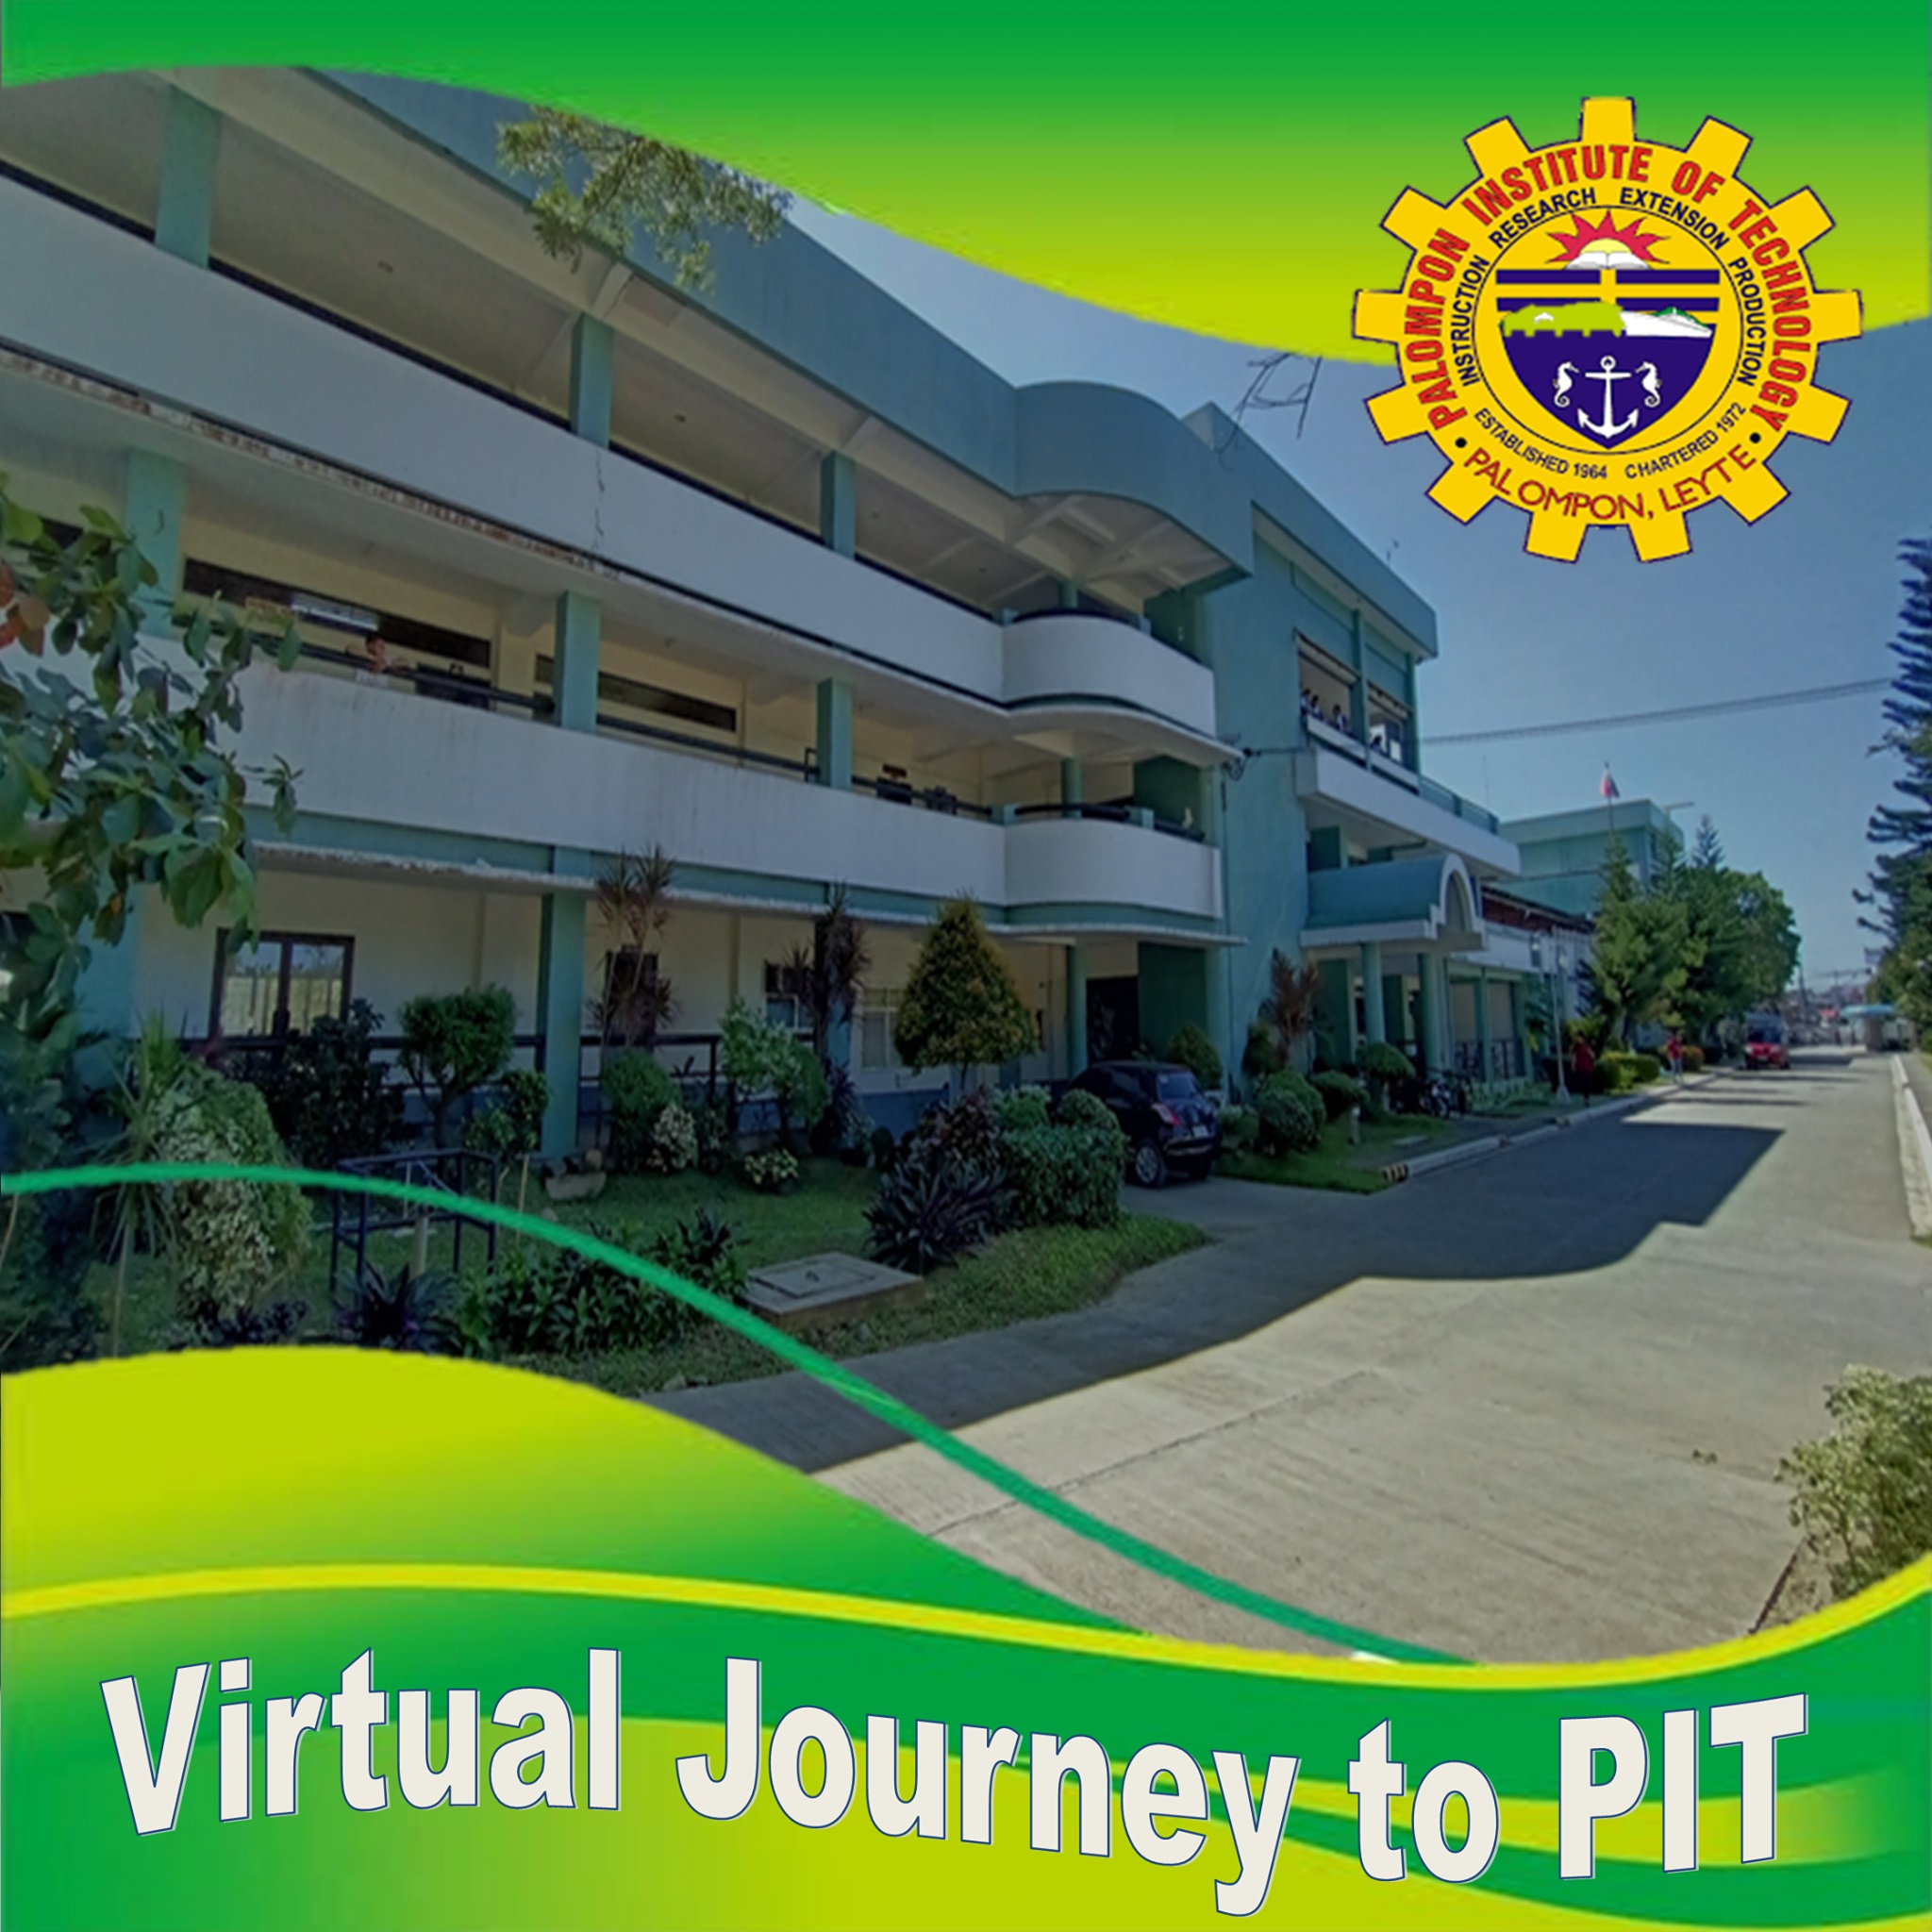 A VIRTUAL JOURNEY TO PIT